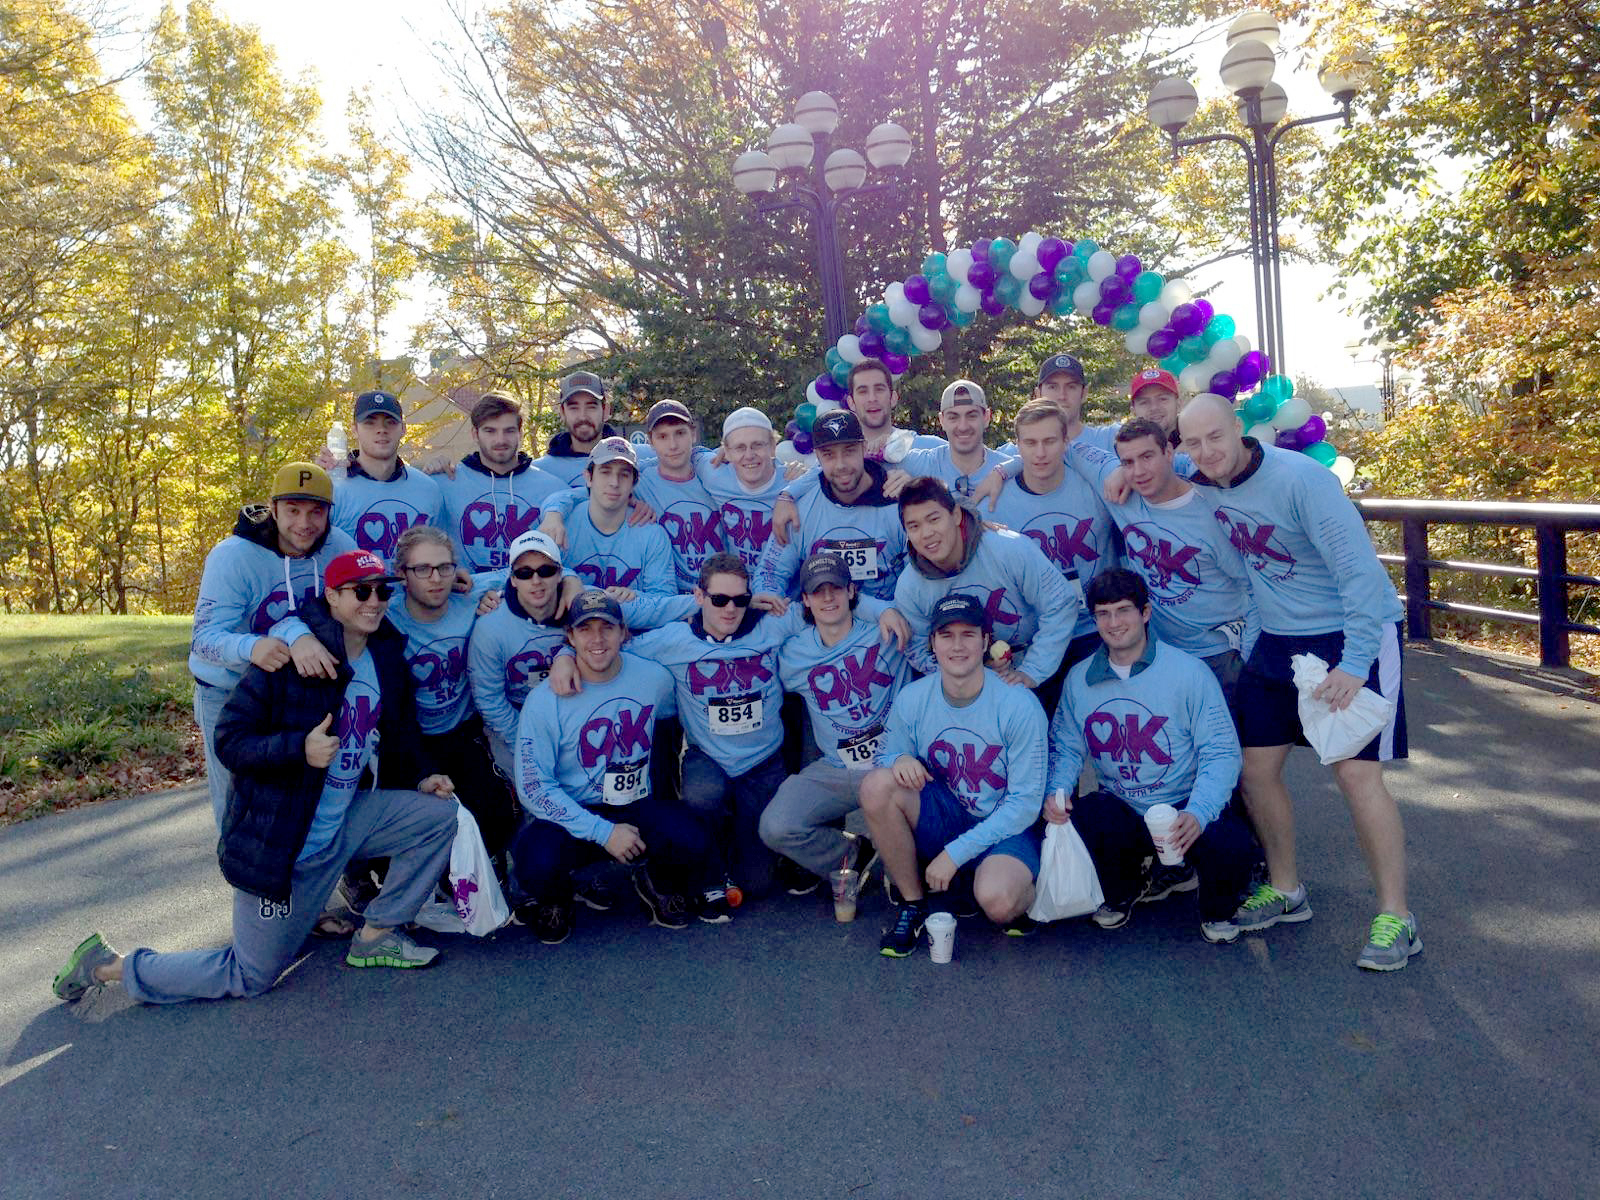 A large contingent of Men's Ice Hockey players participated in the run and walk.